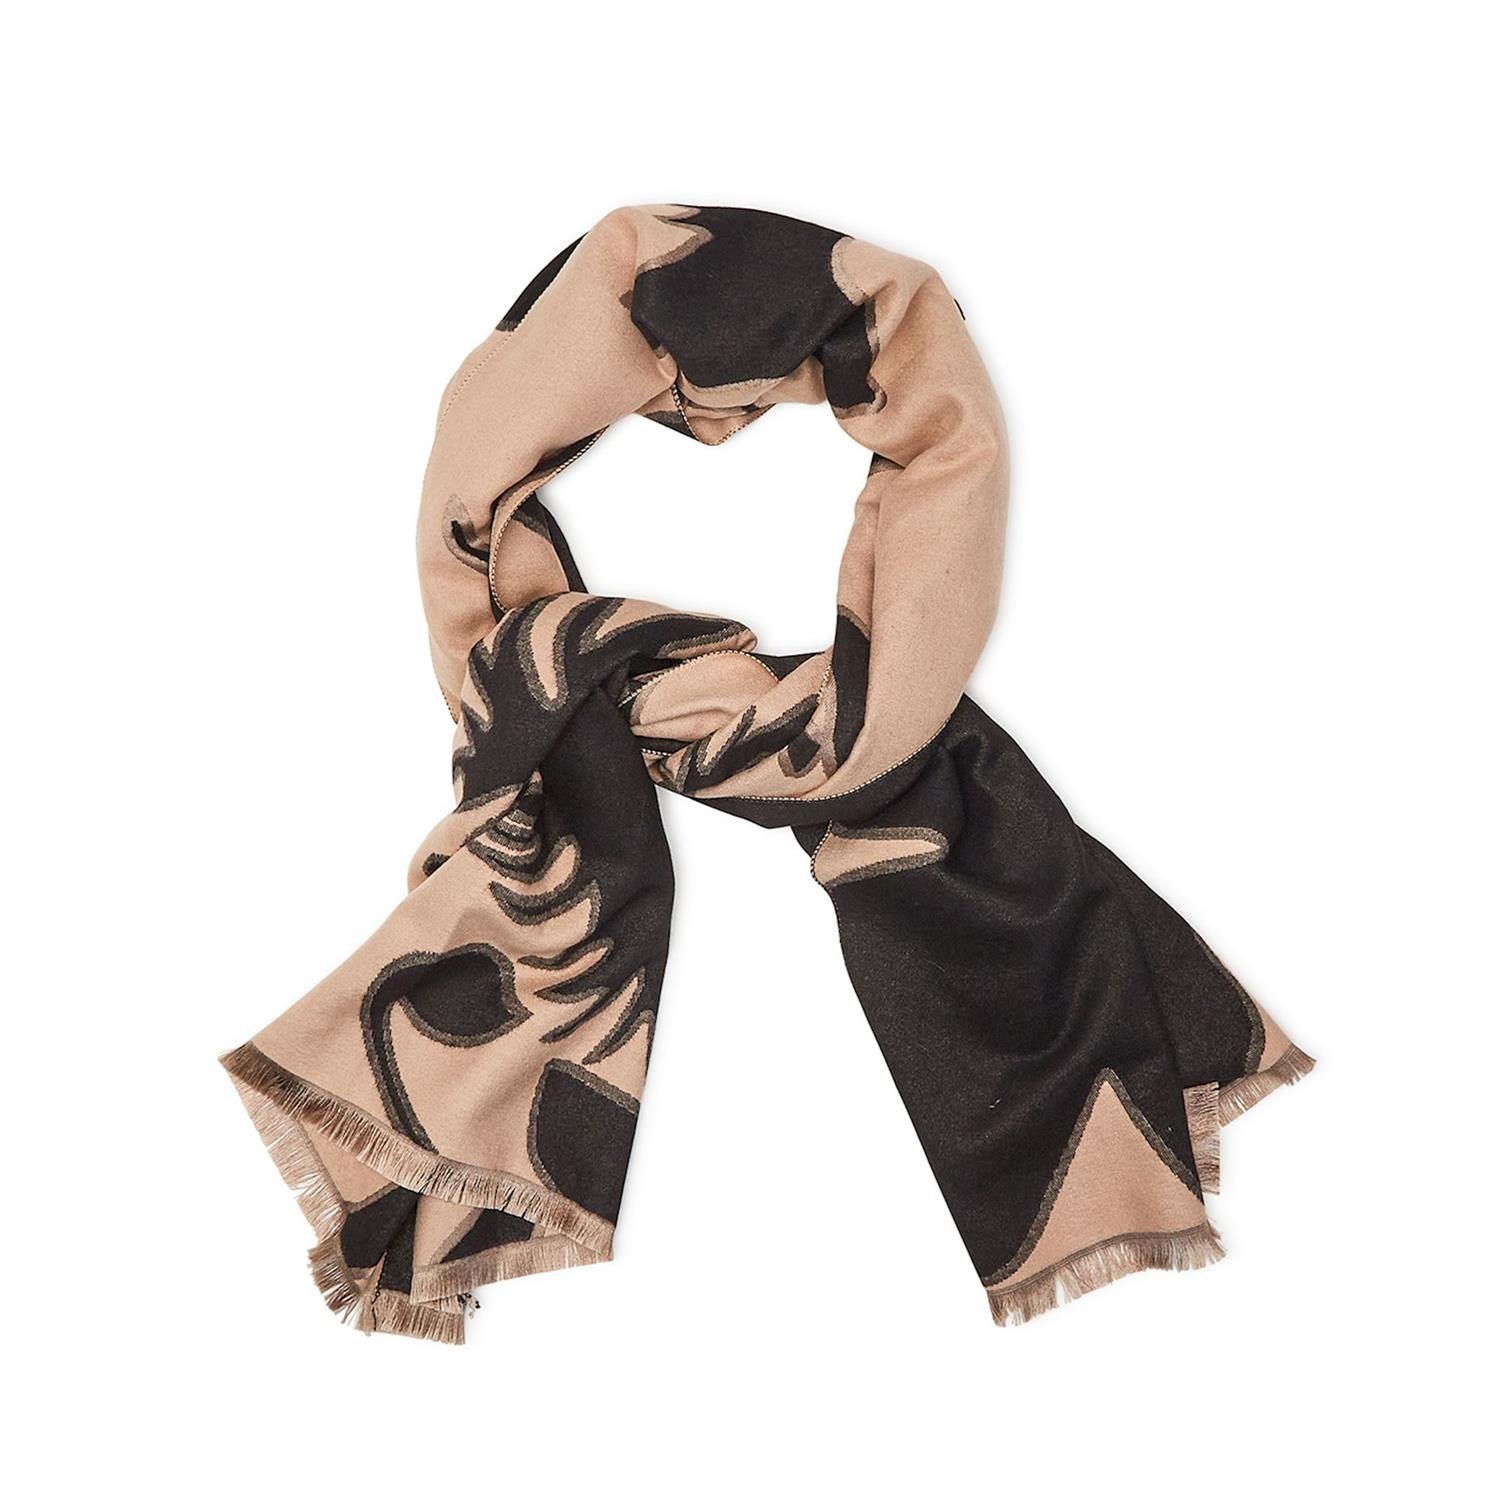 The versatile design of this shawl allows for endless styling possibilities. Drape it over your shoulders for a chic and effortless look or wrap it around your neck as a statement scarf. The abstract botanical print is both trendy and timeless, making it a great accessory to wear all year round.  Super soft viscose-polyester blend 70"L Reversible wear